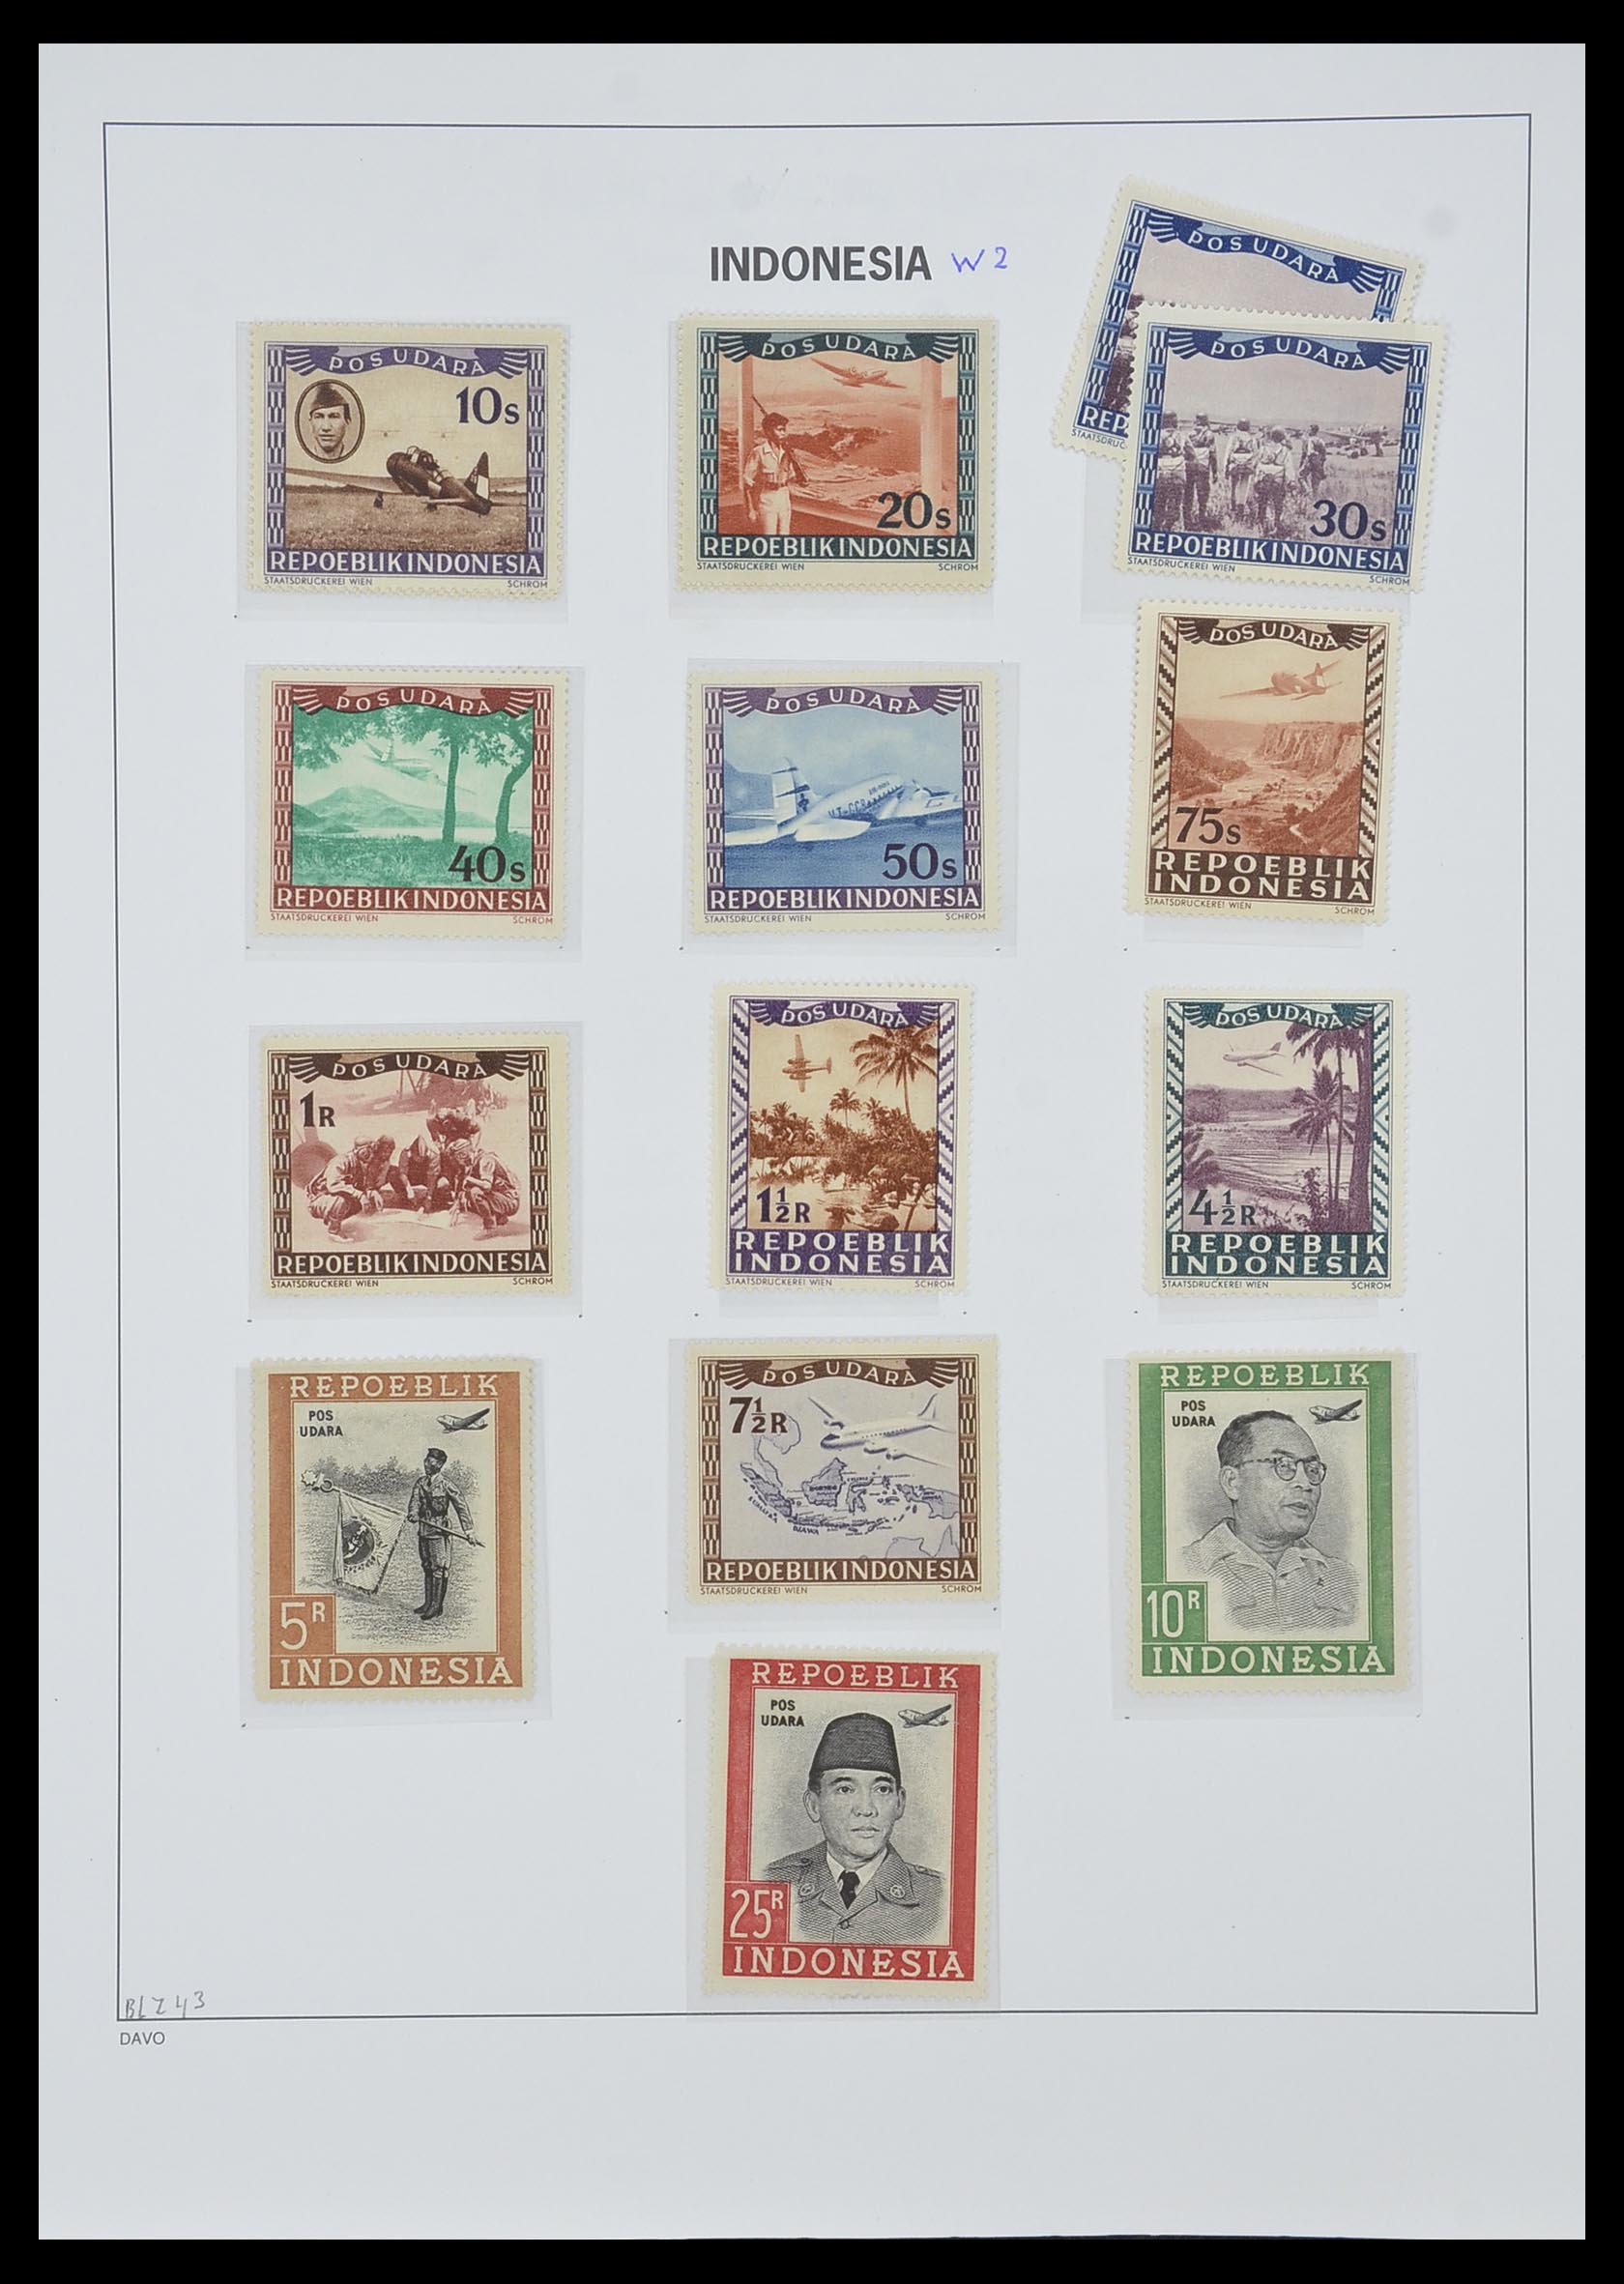 33988 011 - Stamp collection 33988 Vienna printings Indonesia.